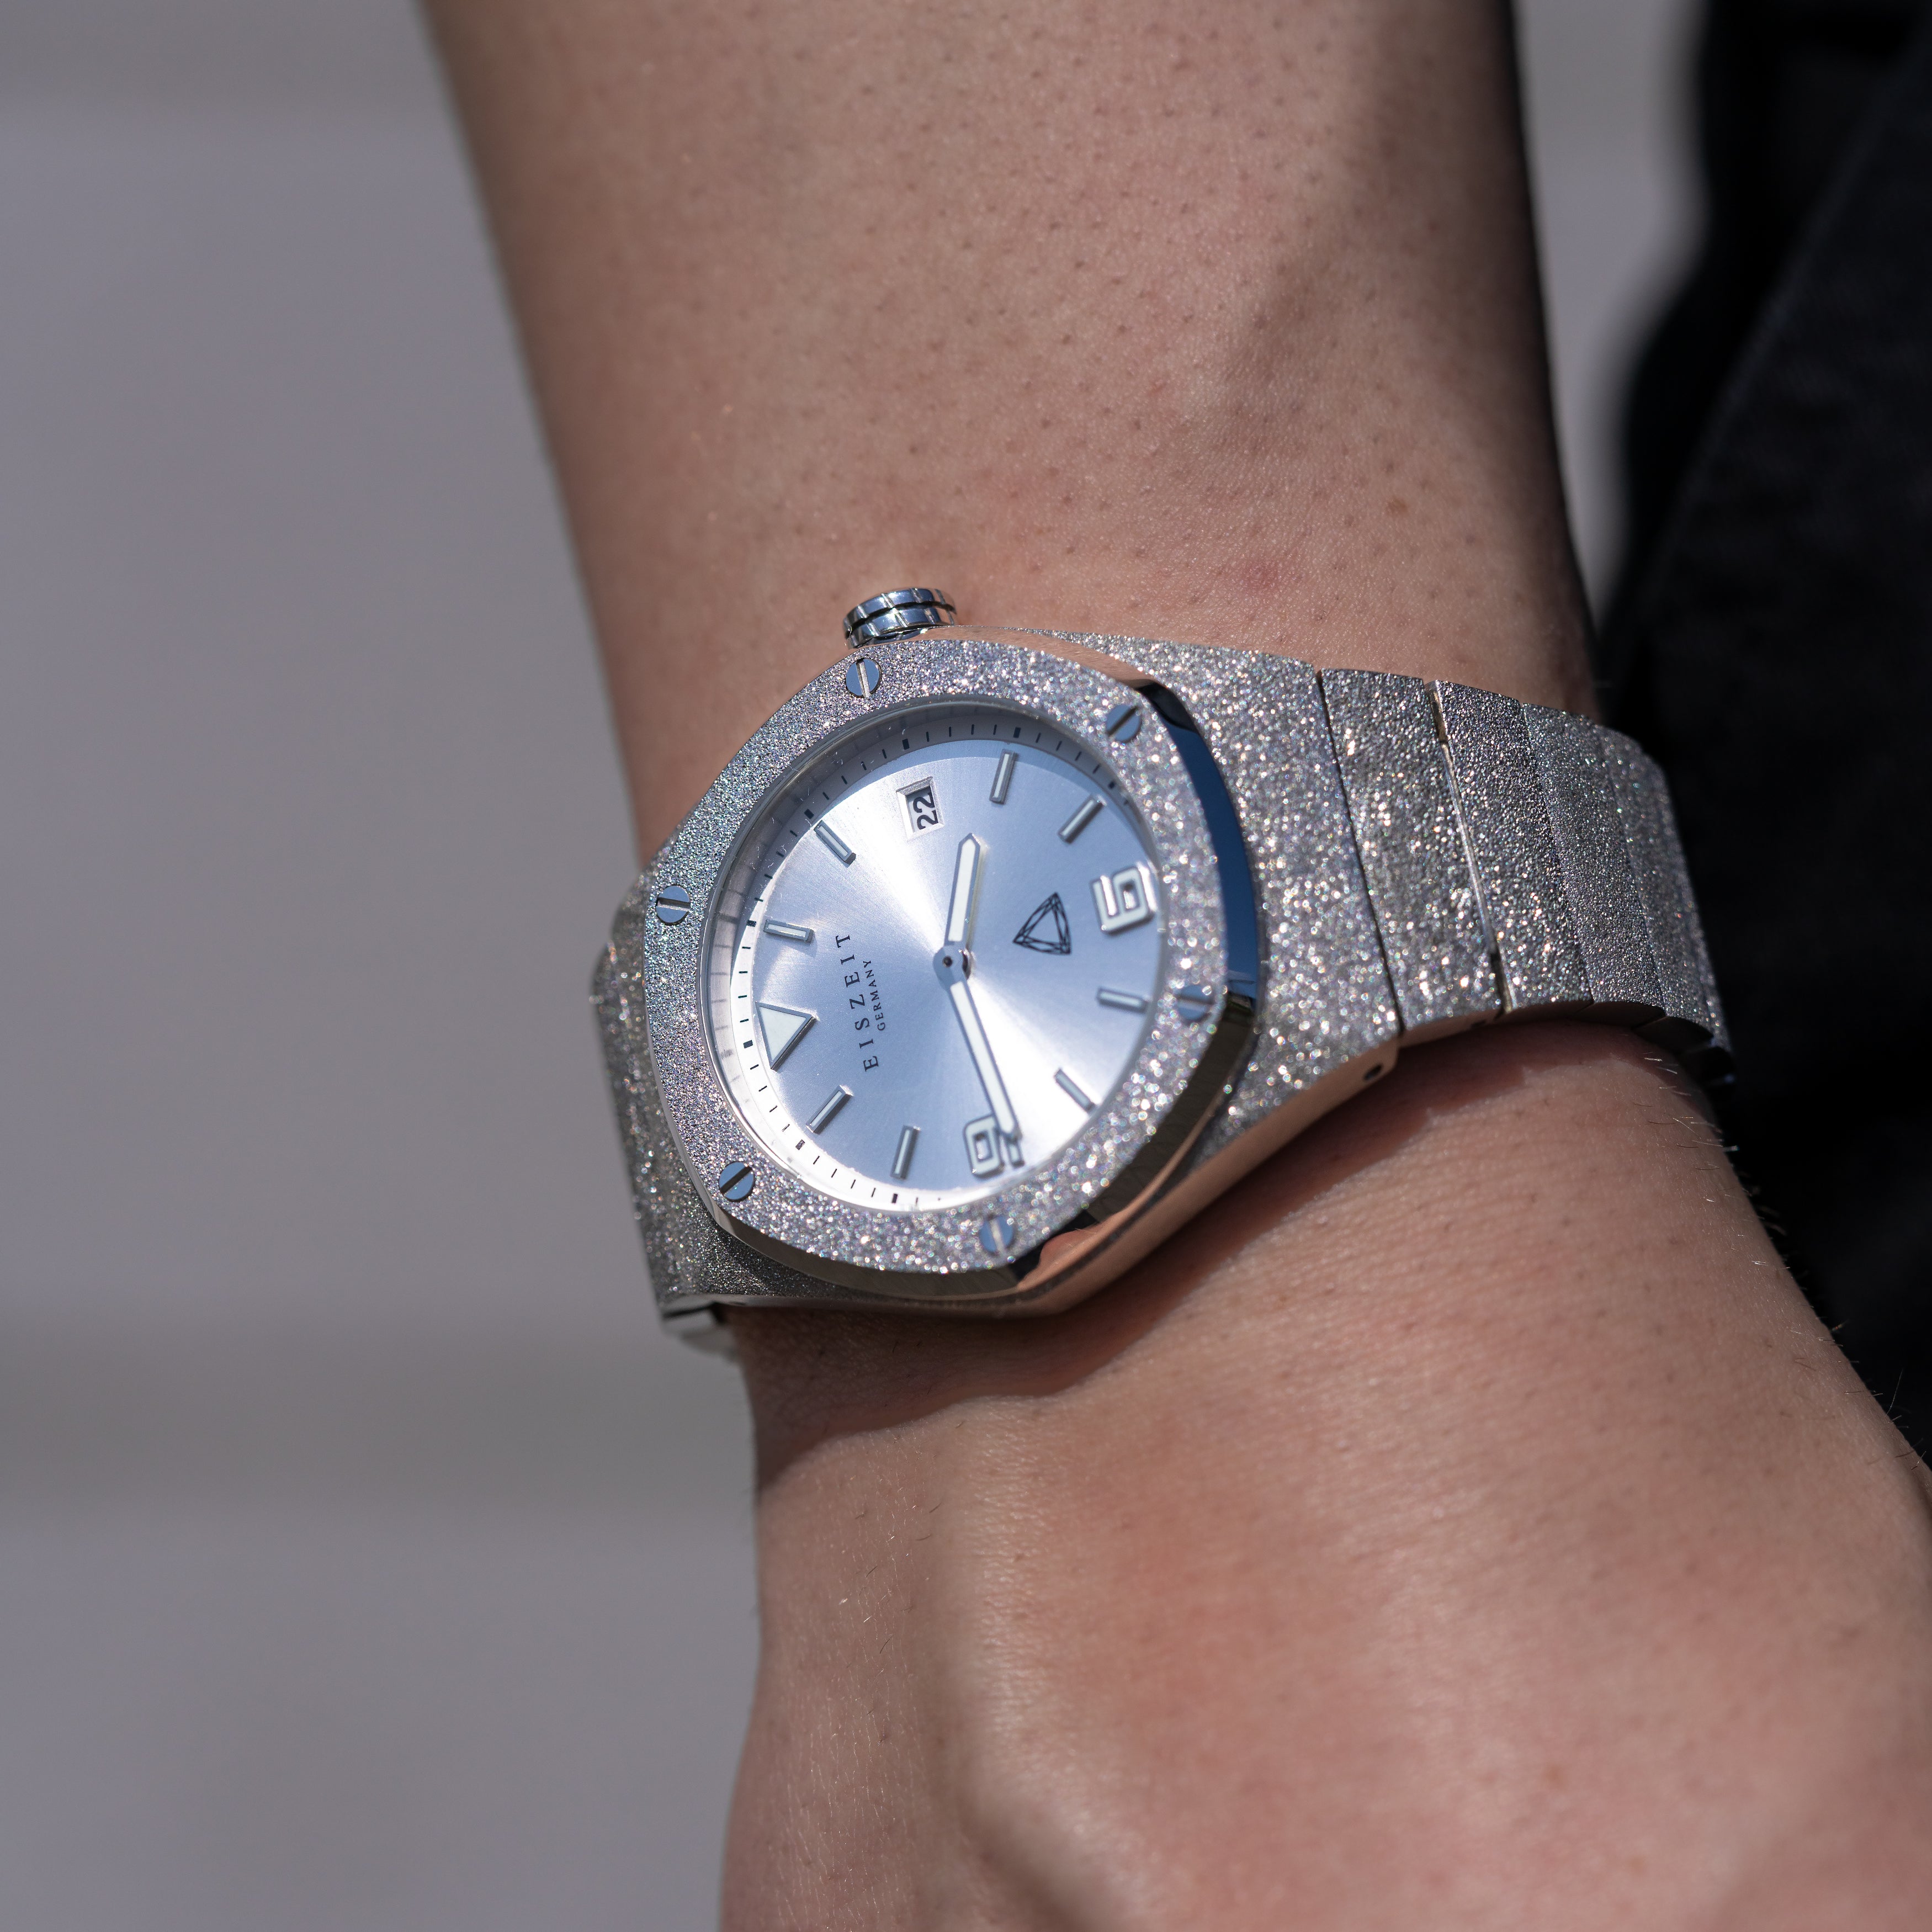 EISZEIT 41MM FROSTED WATCH SILVER DIAL